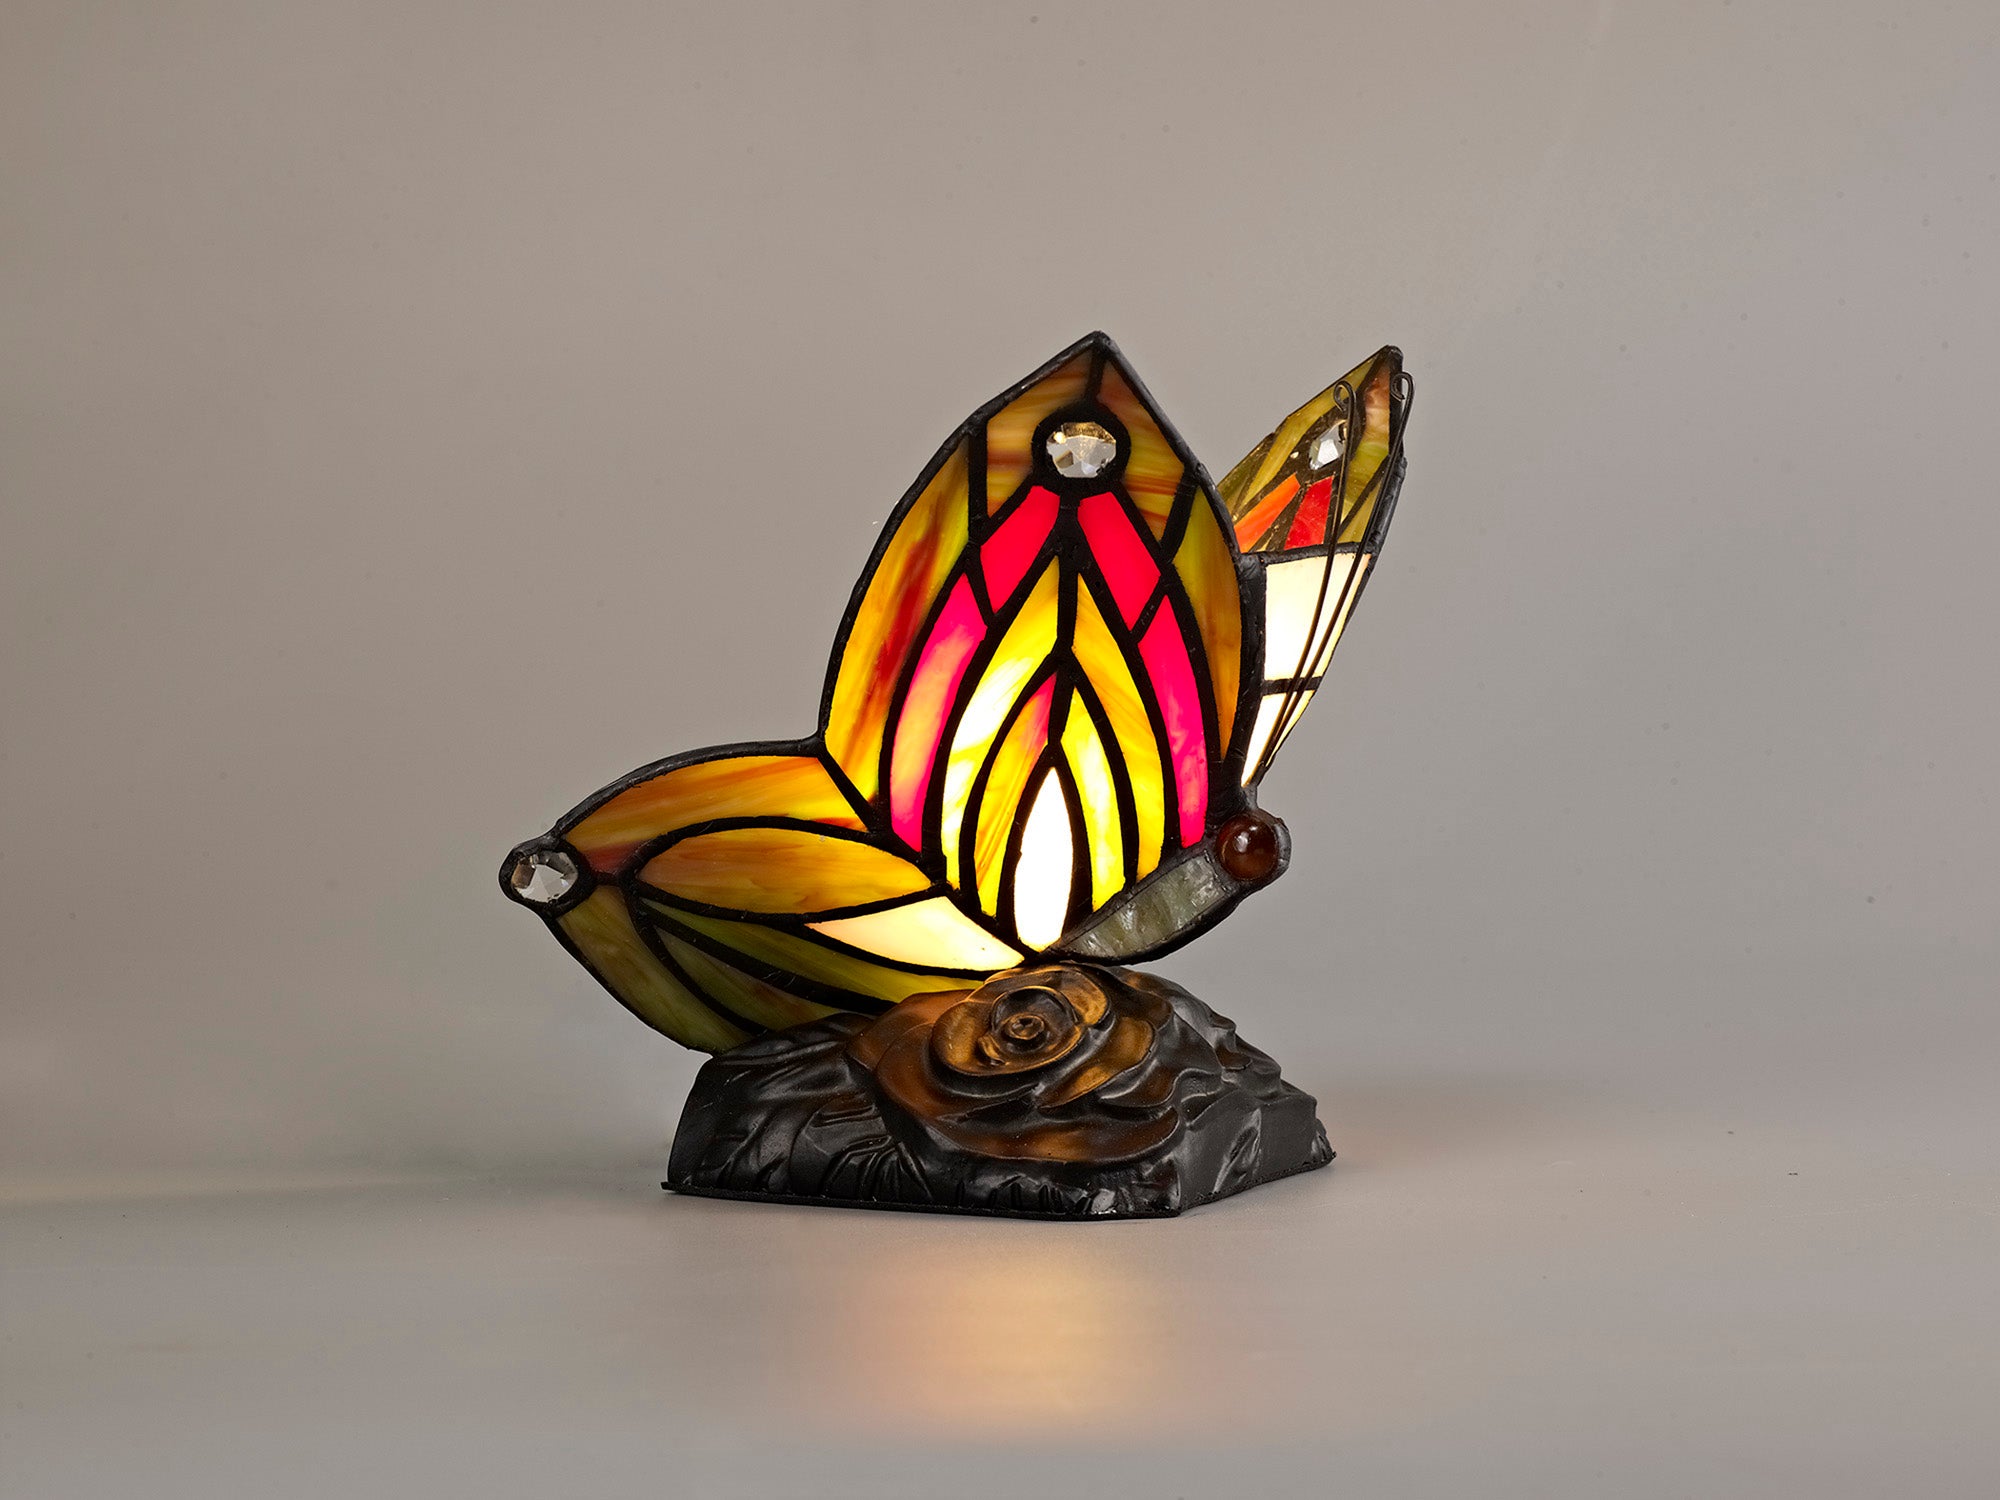 Mohill Tiffany Butterfly Table Lamp, 1 x E14, Black Base With Various Finishes  With Clear Crystal